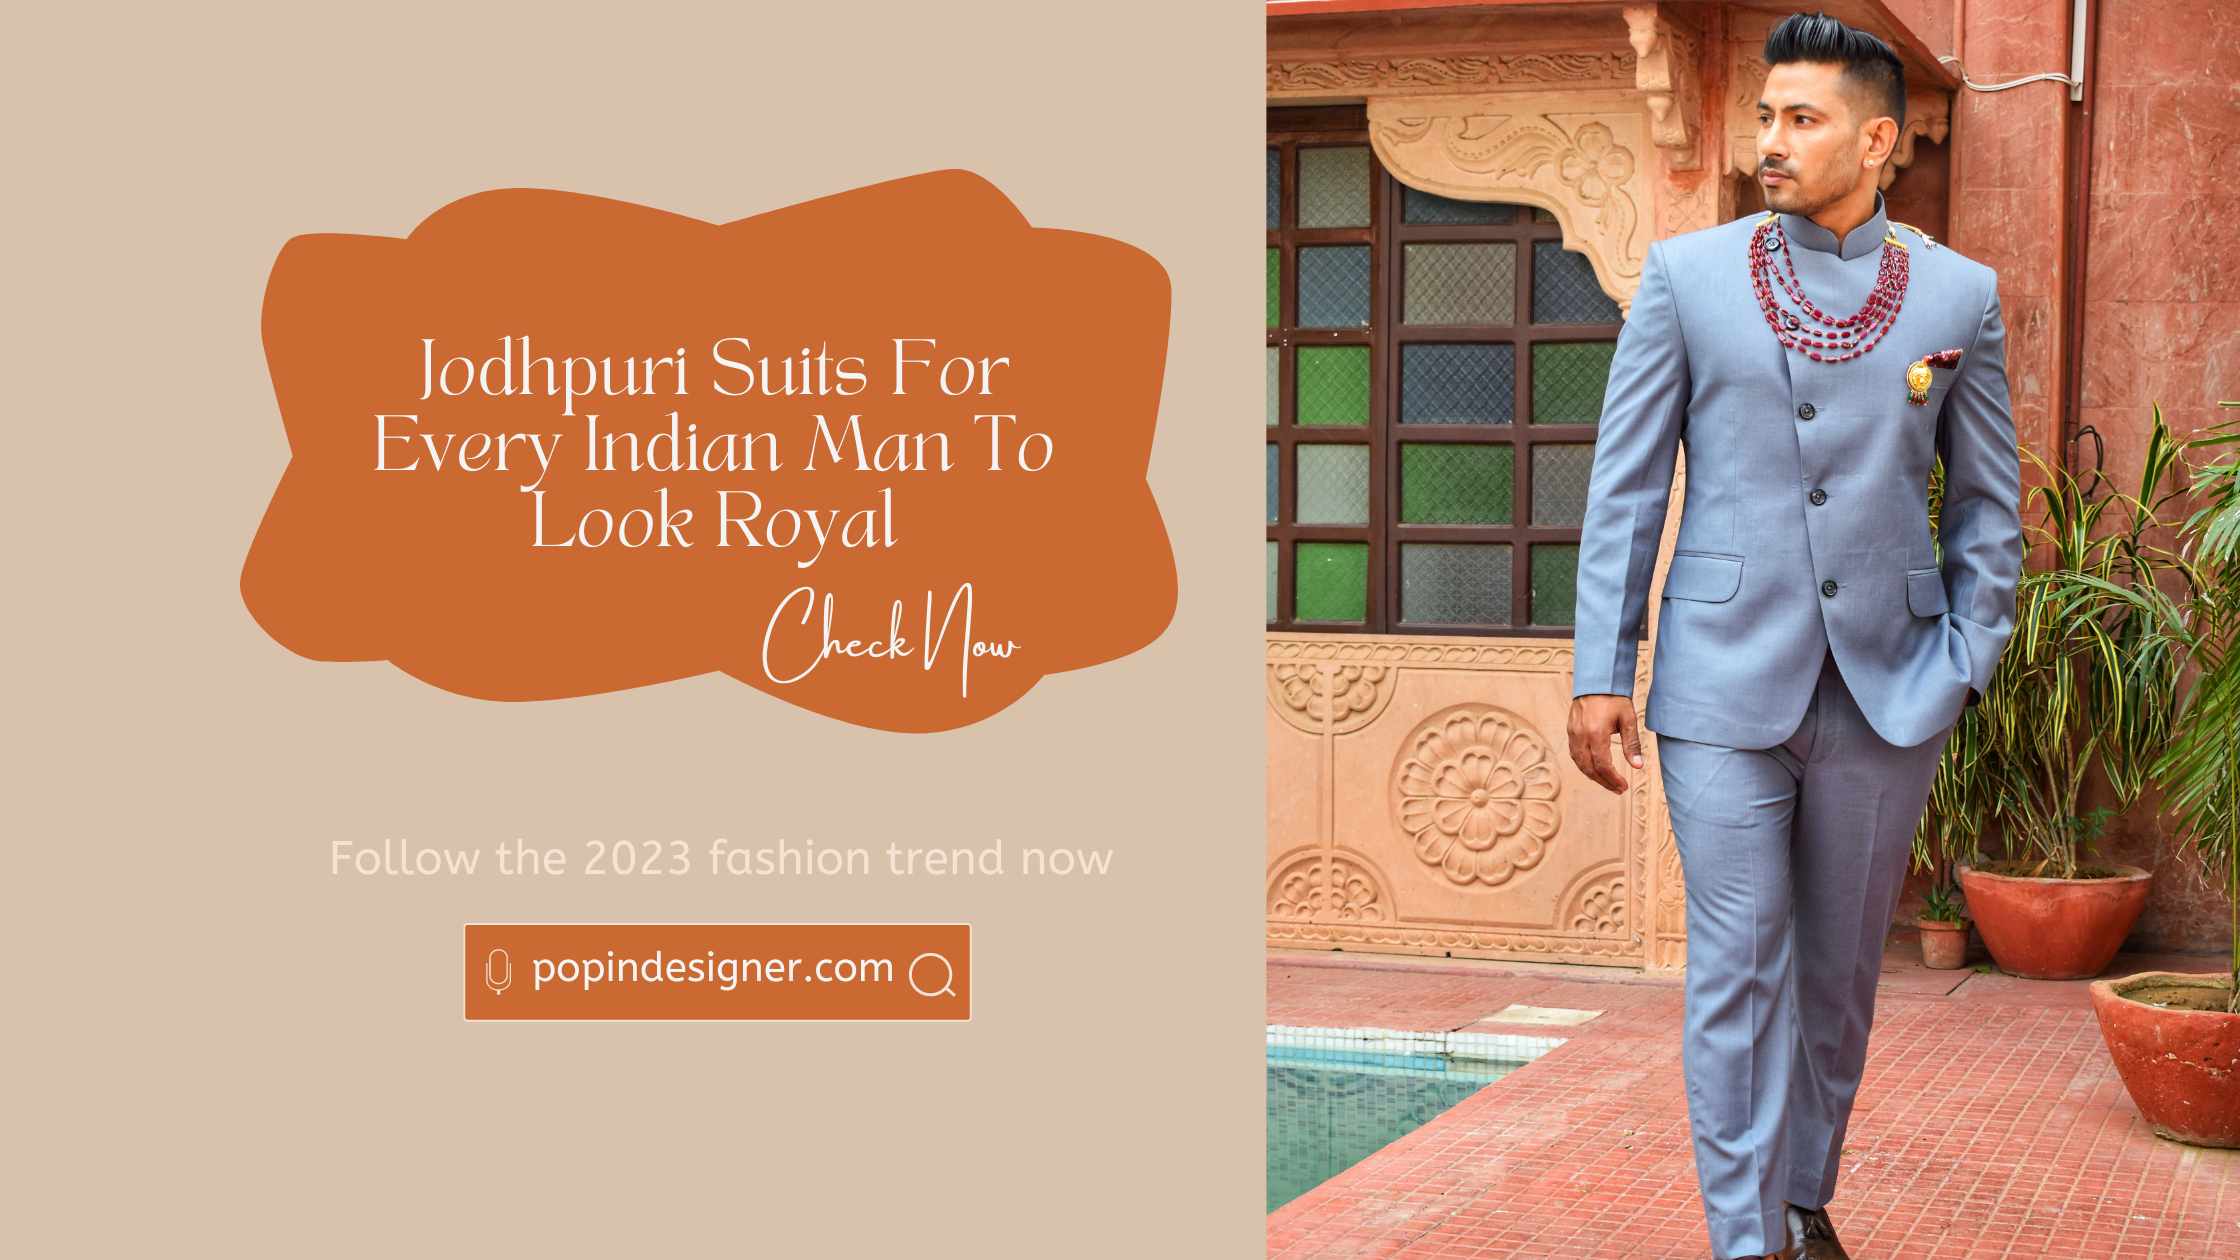 Jodhpuri Suits For Every Indian Man To Look Royal